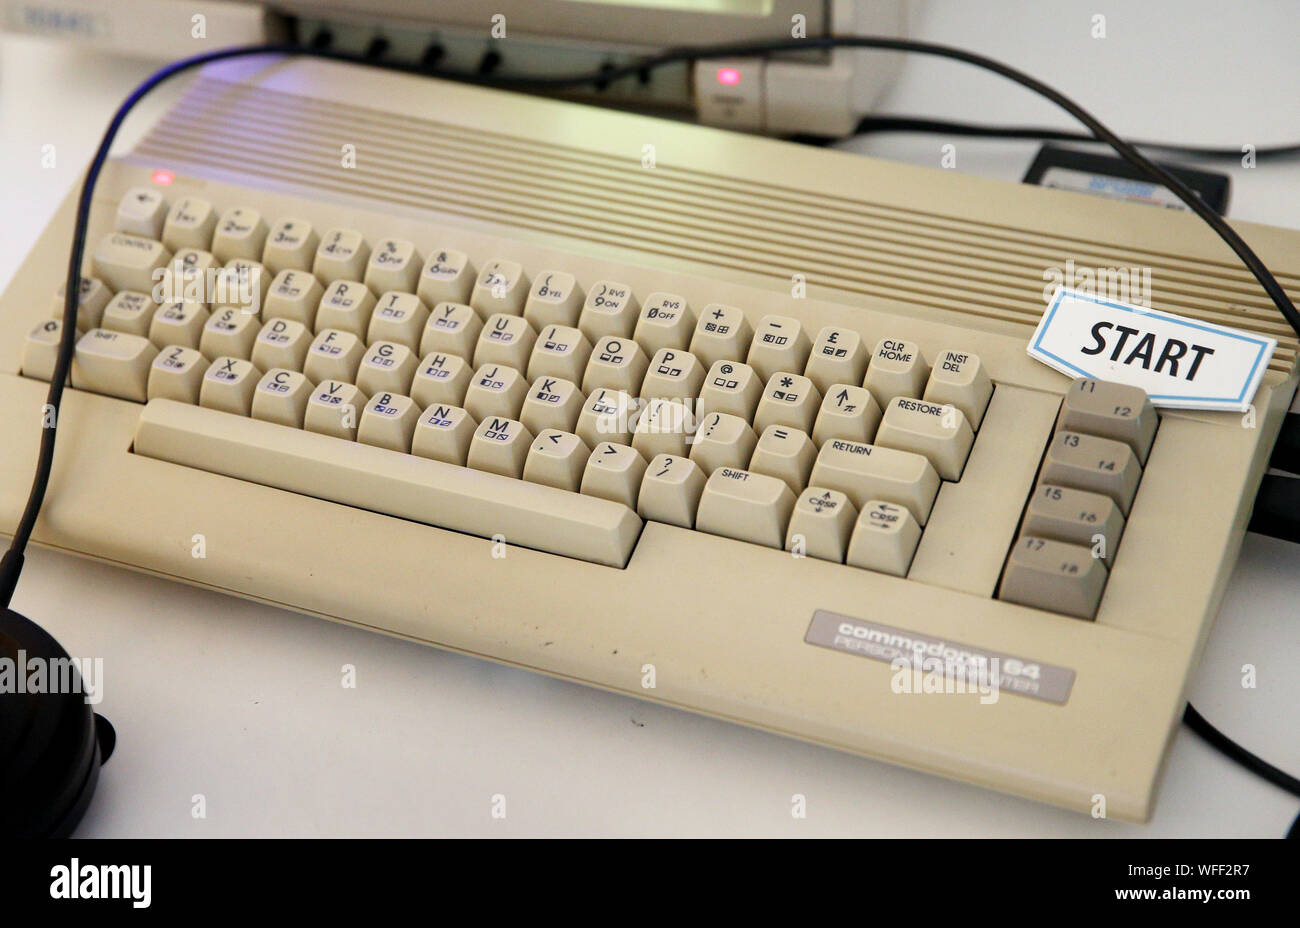 Wroclaw, Poland. 31st Aug, 2019. The company Retro Games has announced the return of the classic Commodore 64 computer. The C64 is a refreshed Commodore 64, which can be connected to a modern TV and play one of the 64 classic games included. The premiere of the C64 was announced for December 2019. The photo shows a former Commodore 64 computer in the Museum of Games and Computers in Wroclaw. Credit: Damian Klamka/ZUMA Wire/Alamy Live News Stock Photo